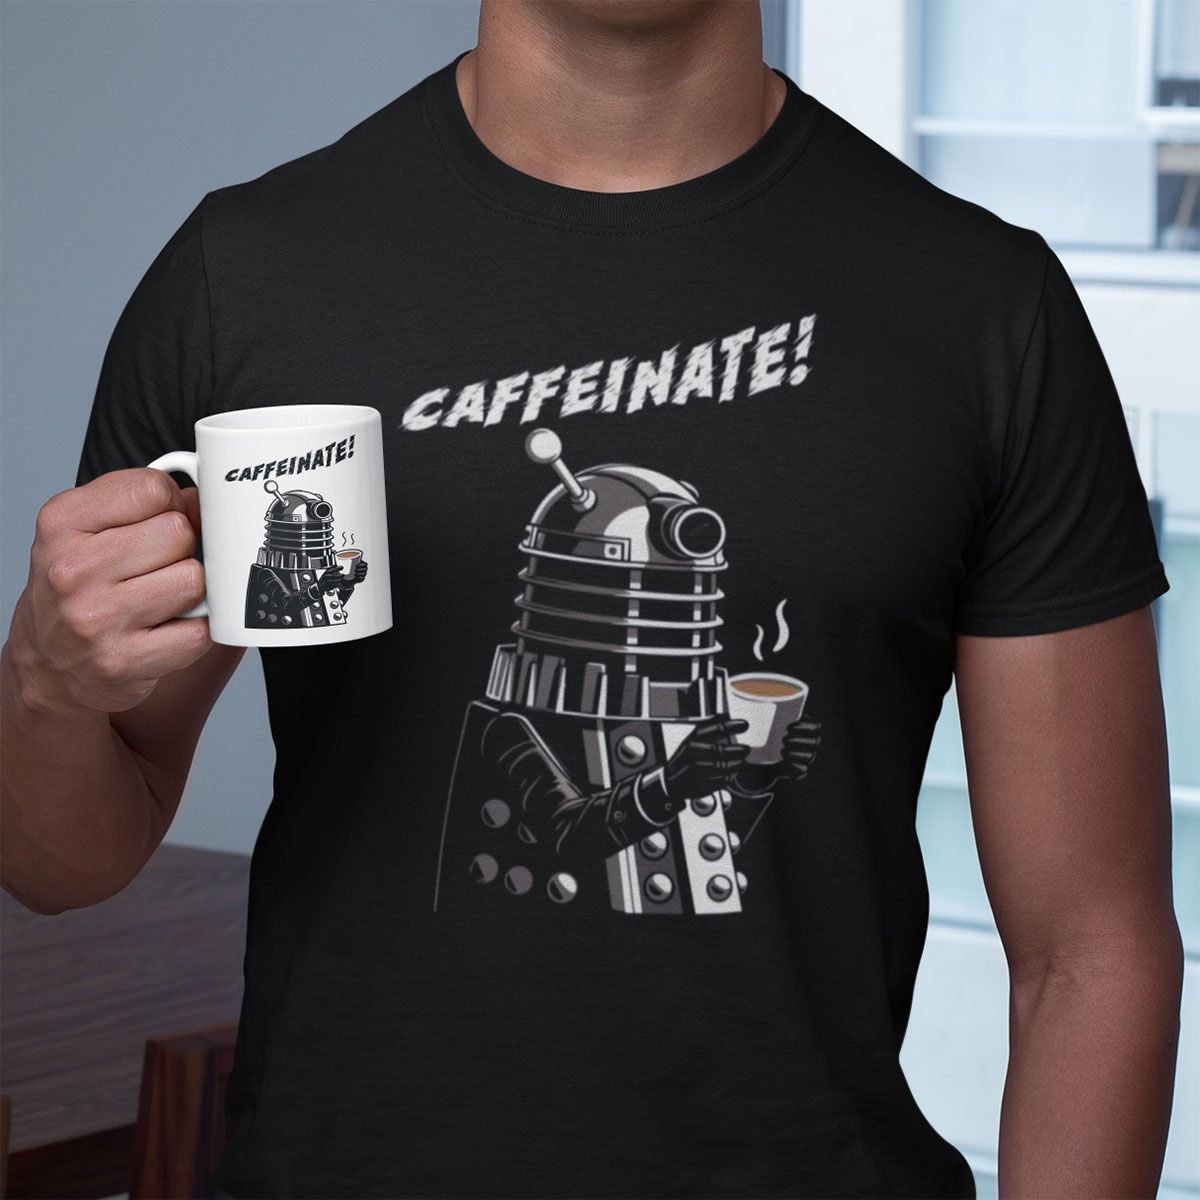 CAFFEINATE! Get yours HERE >>> buff.ly/3xZCzk8